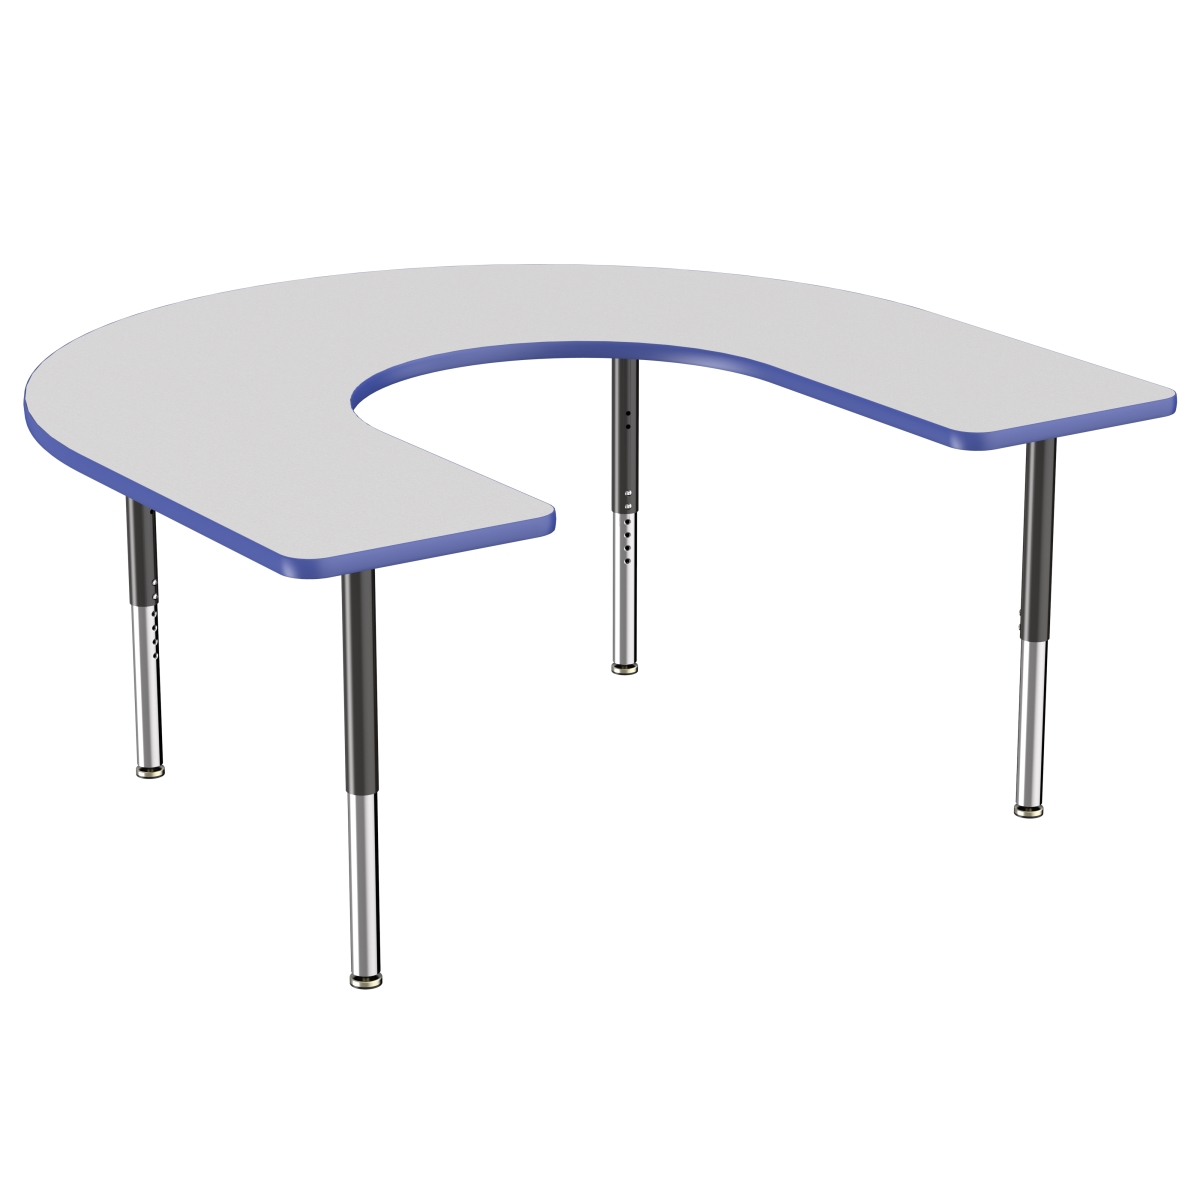 10096-gybl 60 X 66 In. Horseshoe T-mold Adjustable Activity Table With Super Leg - Grey & Blue